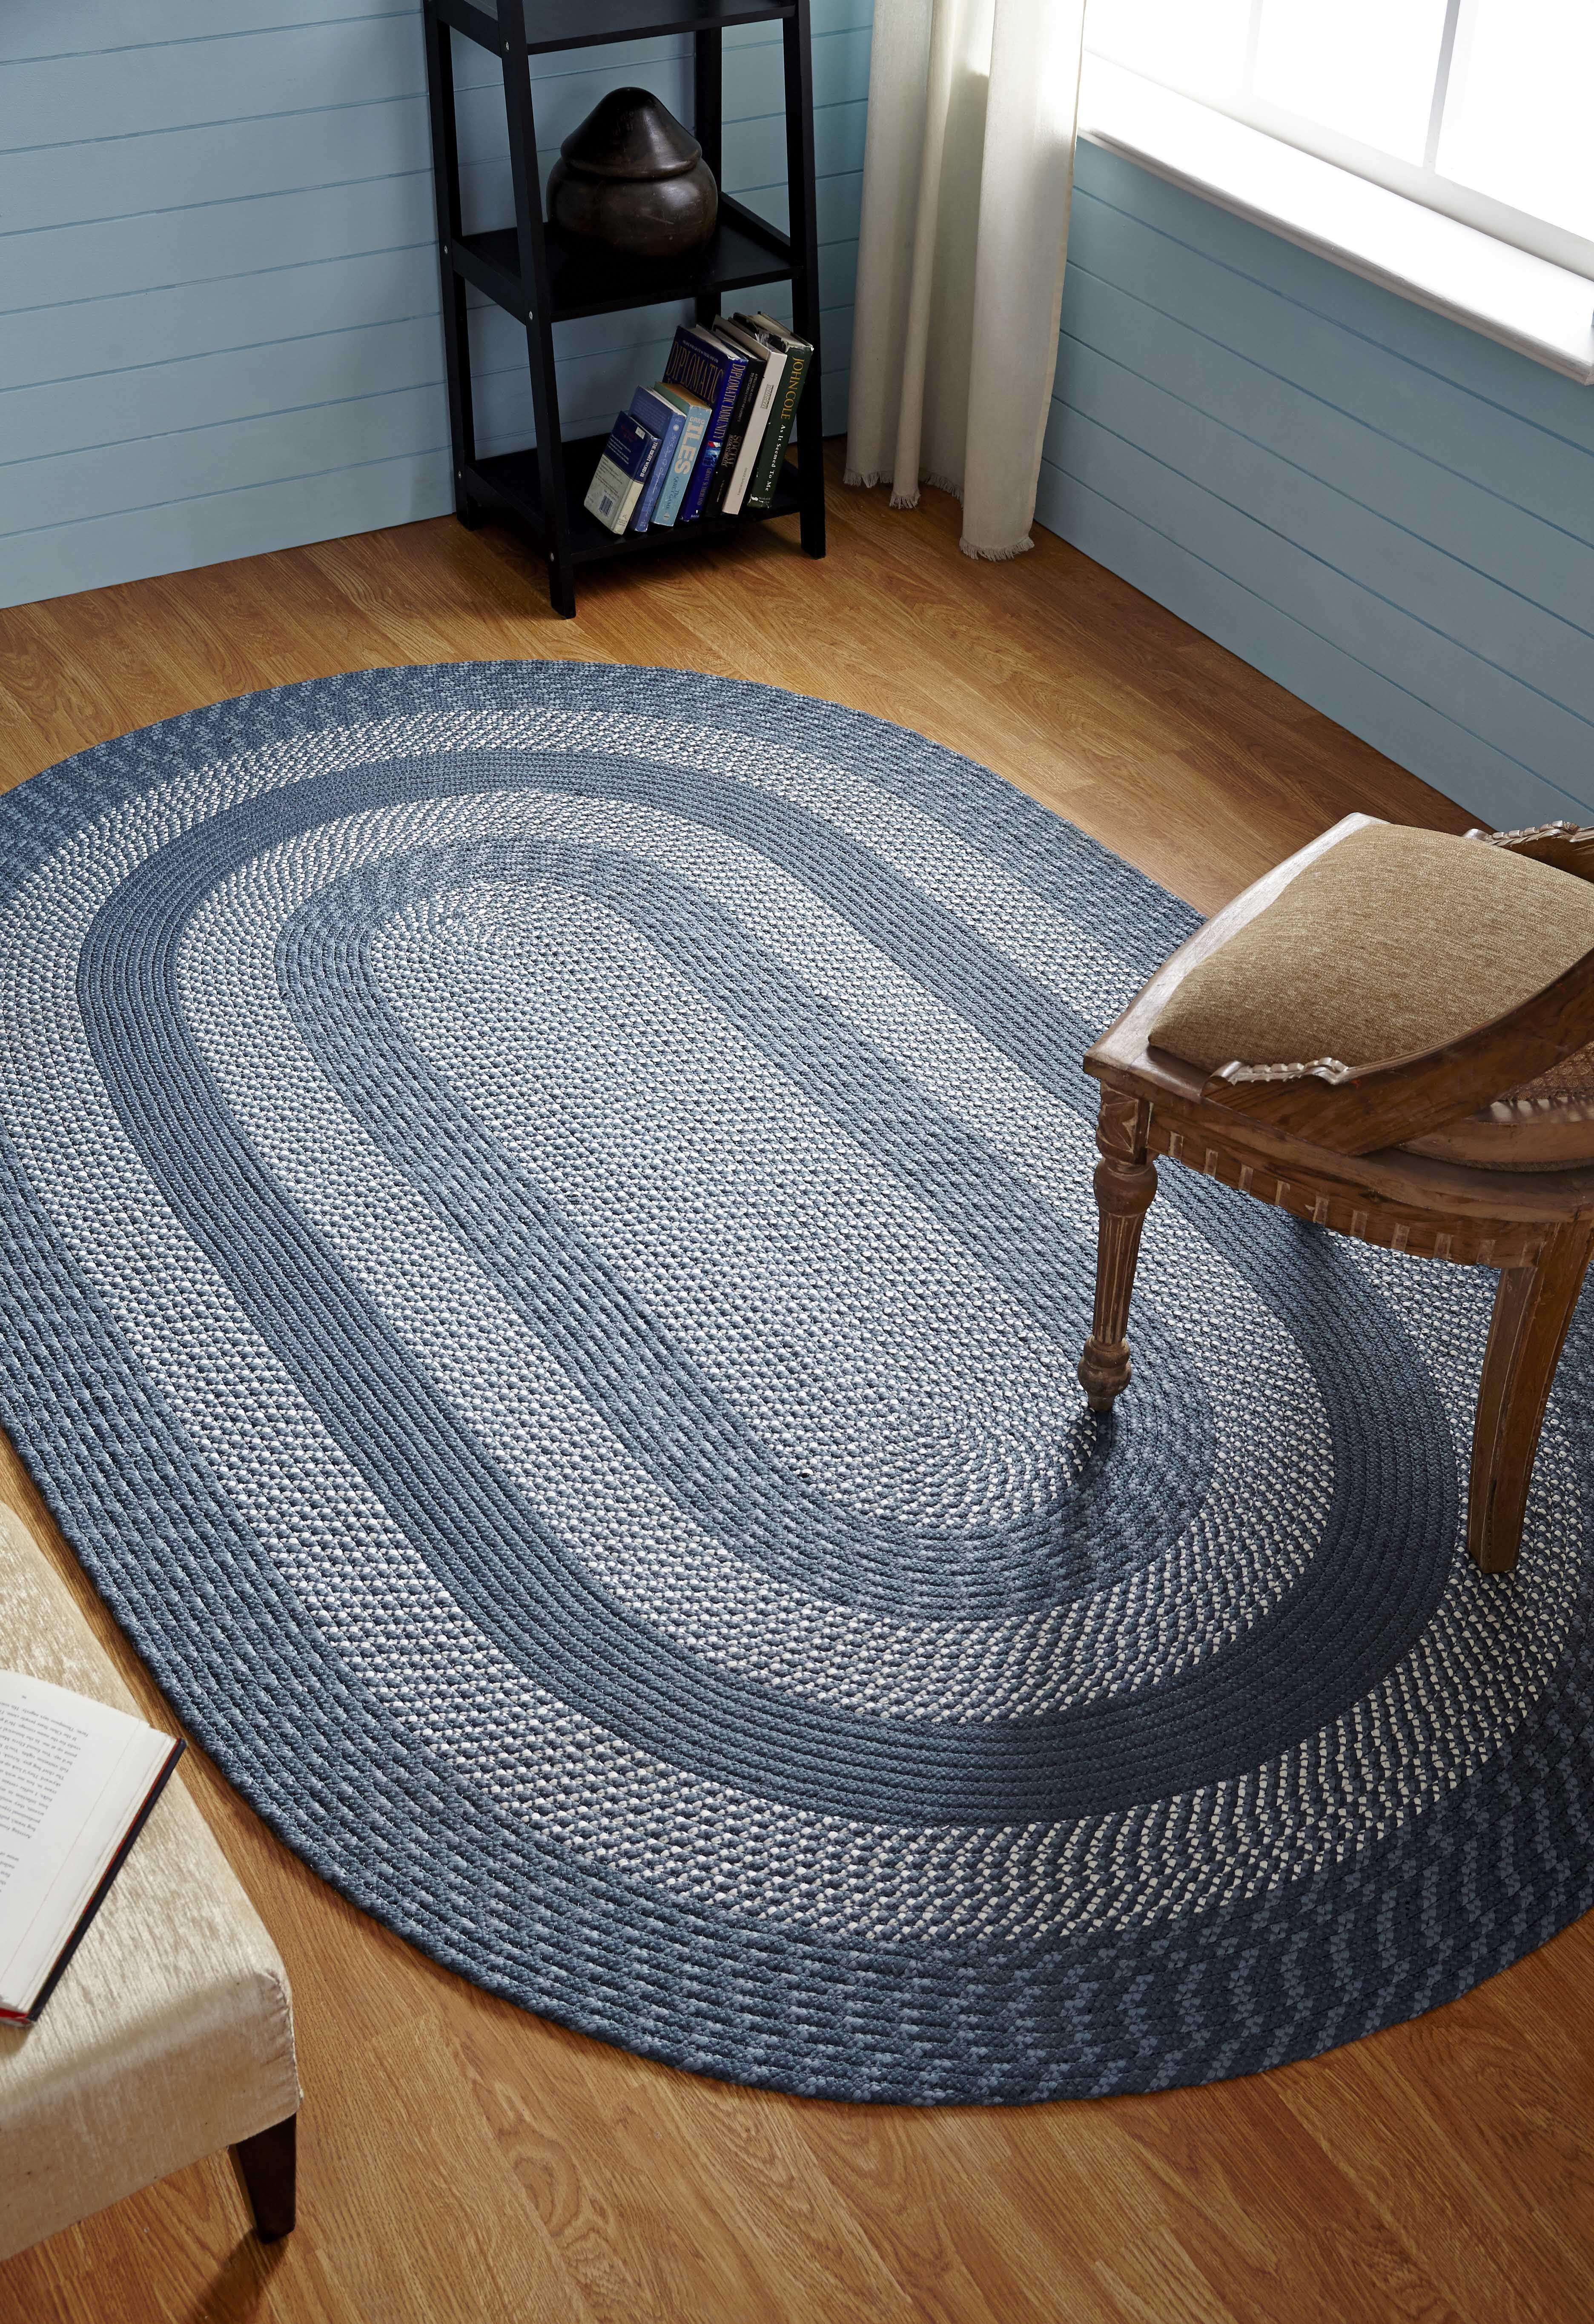 Better Trends Newport 100% Polypropylene Rug Size 42 x 66 Oval, Perfect  Size Braided Rug - Slate Blue 